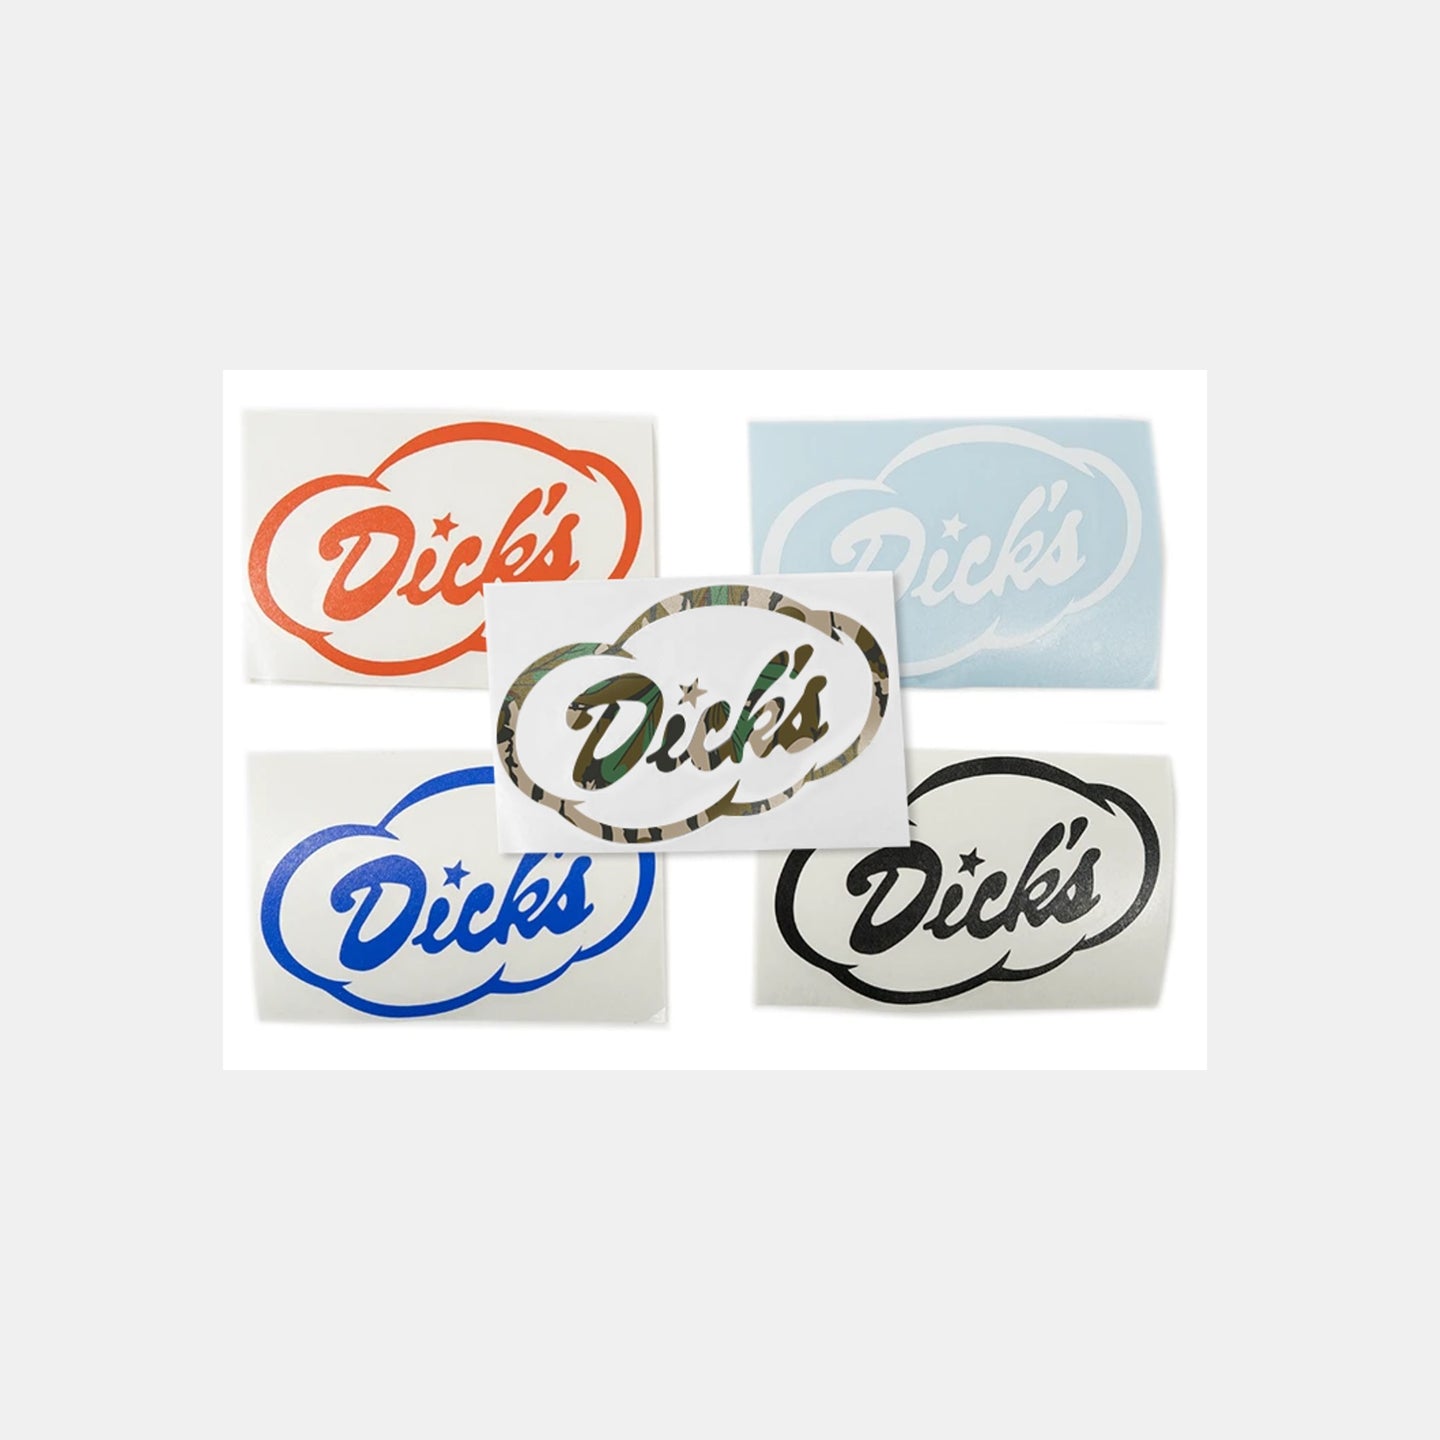 Dick's Drive-In Cloud logo vinyl decals in orange, white, black blue and camo pattern